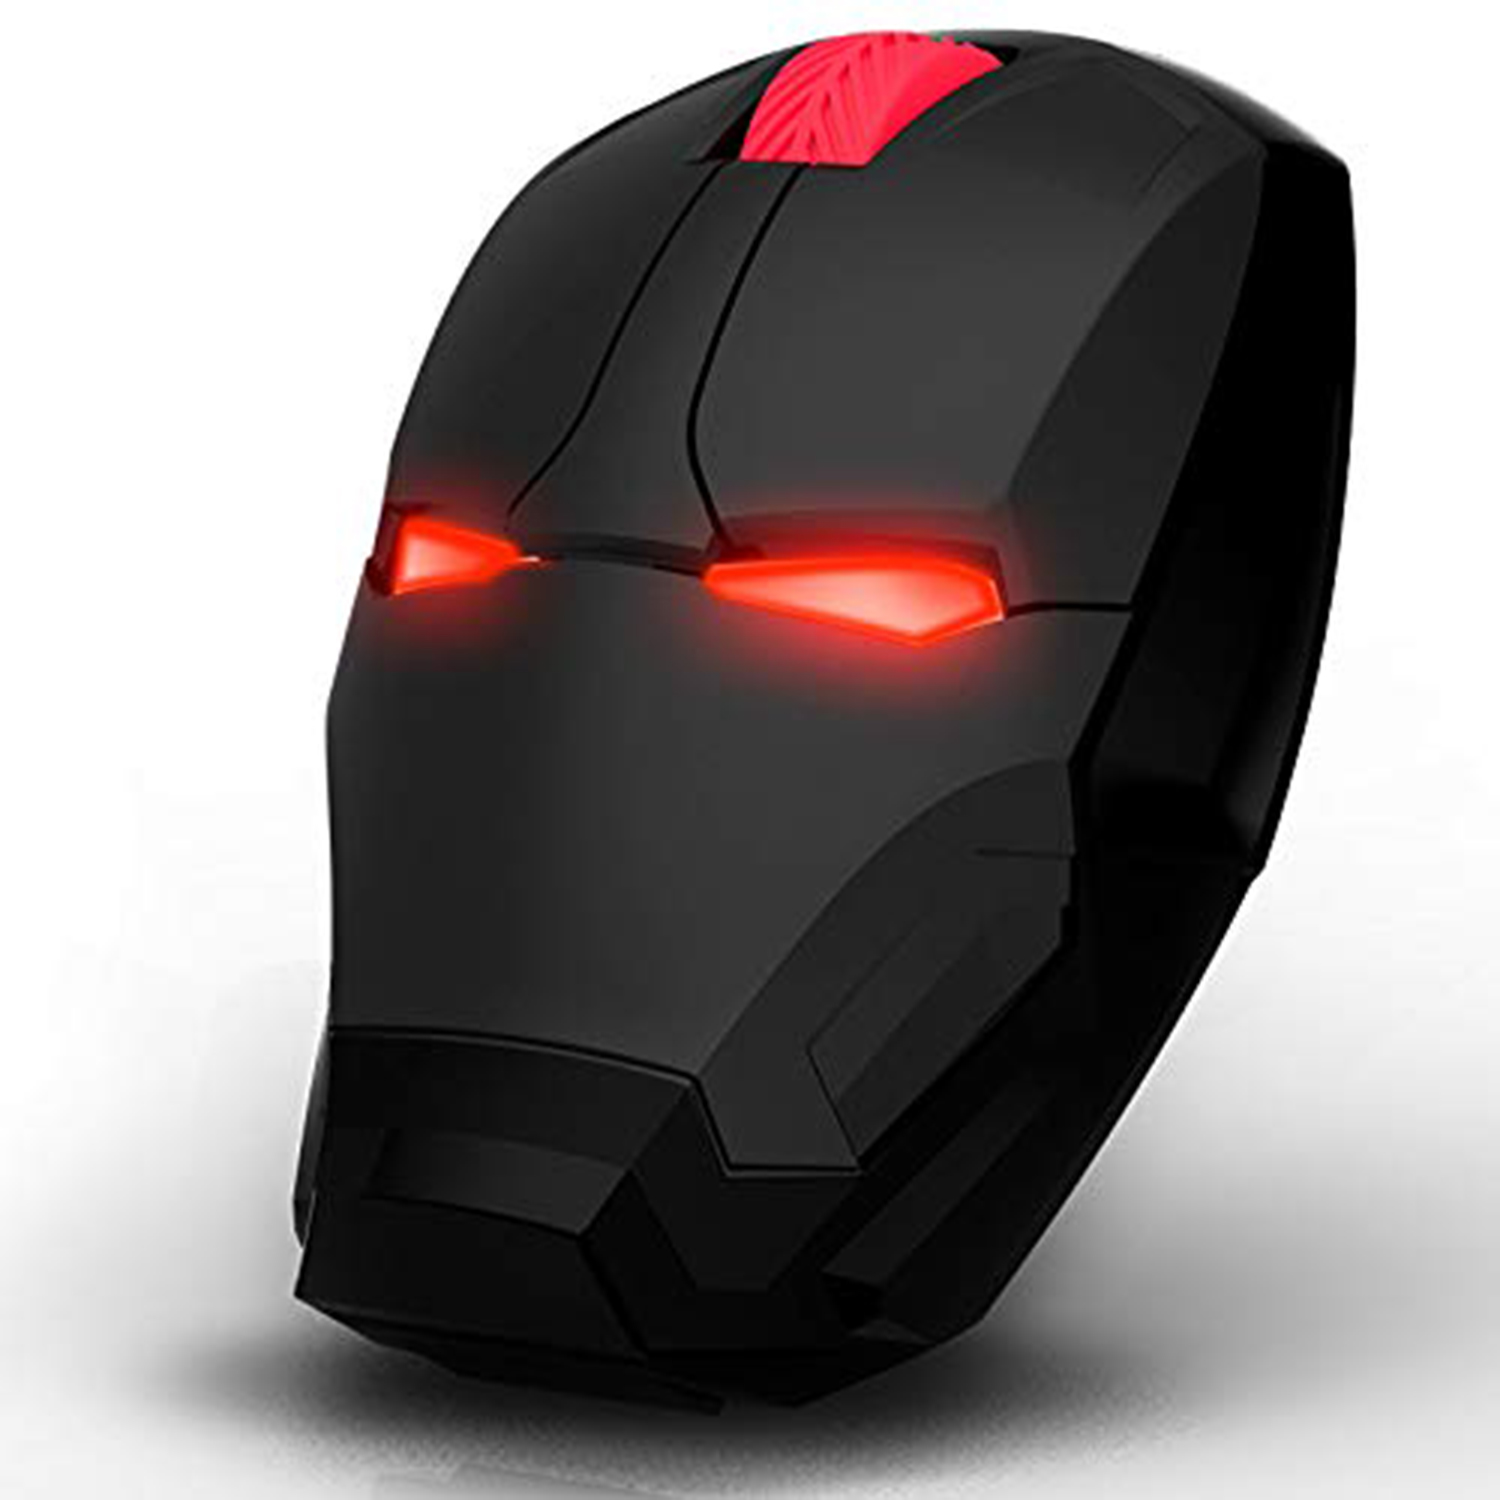 M8 Black LED Wireless Computer Mouse for Kids,2.4G Ergonomic Portable Silence Mouse Novelty with USB